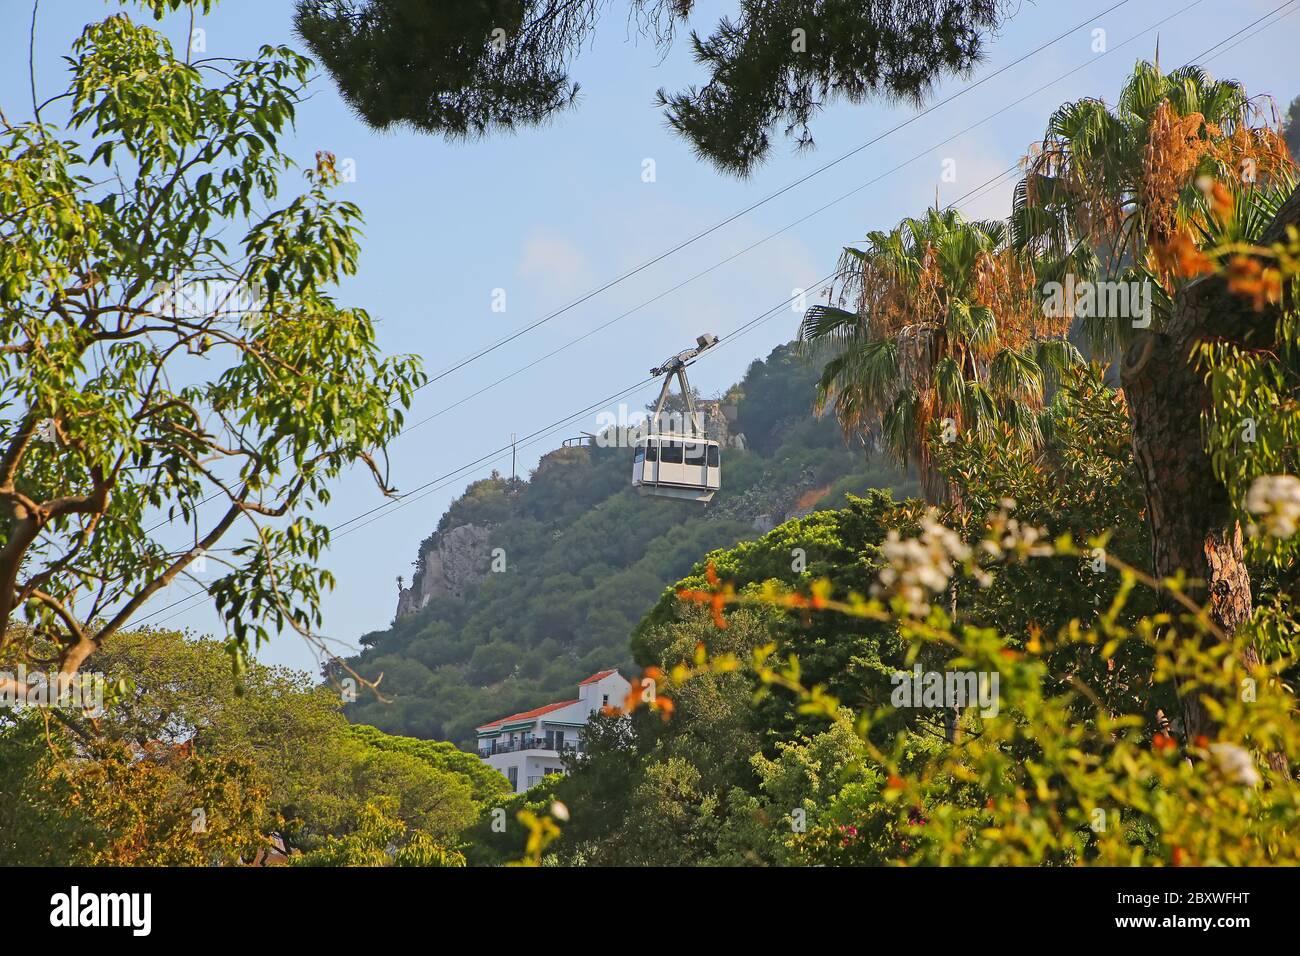 Cable Car or aerial tramway in Gibraltar from La Alameda  botanical garden, Gibraltar. Stock Photo